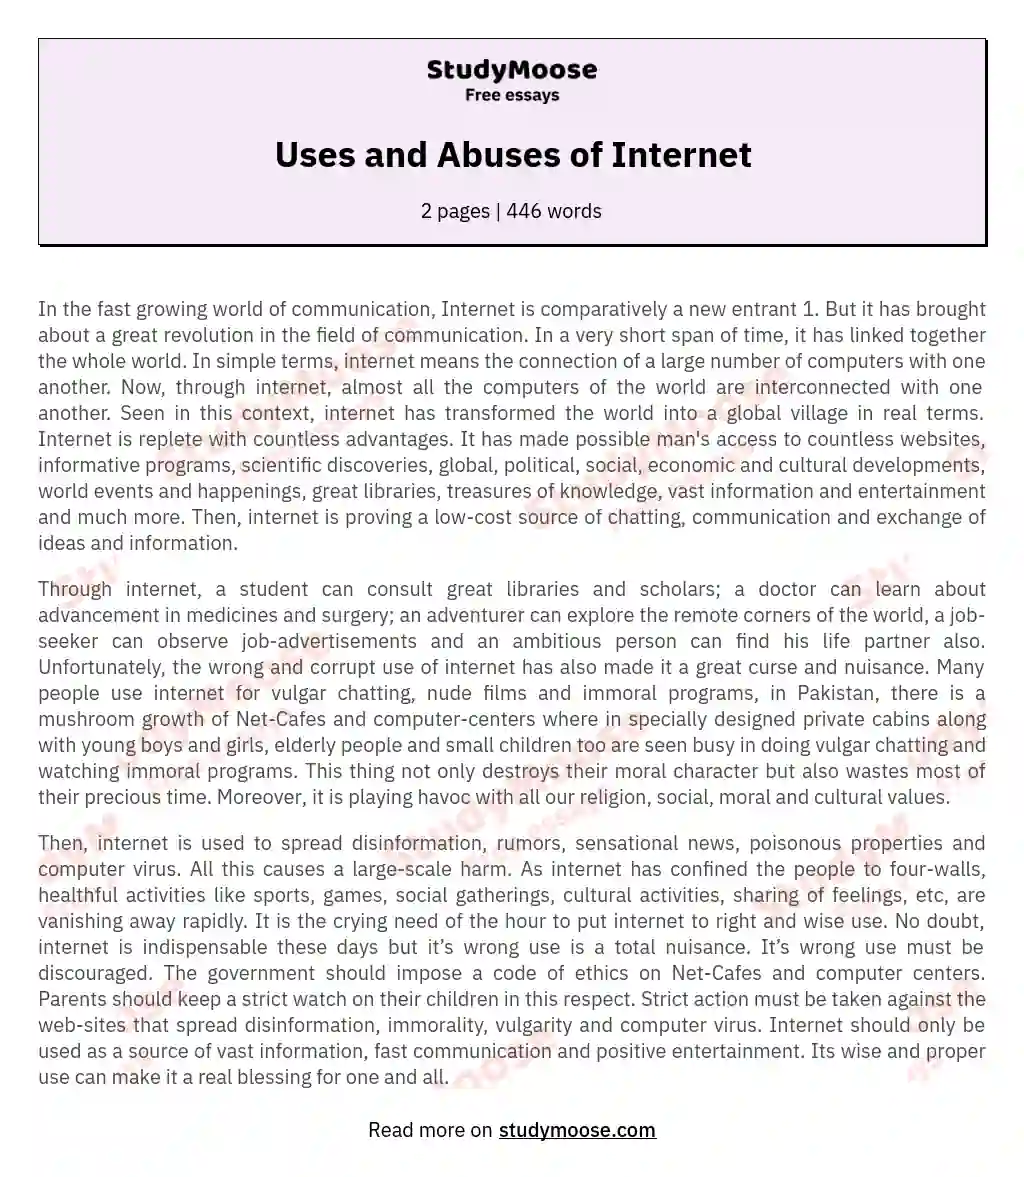 Uses and Abuses of Internet essay